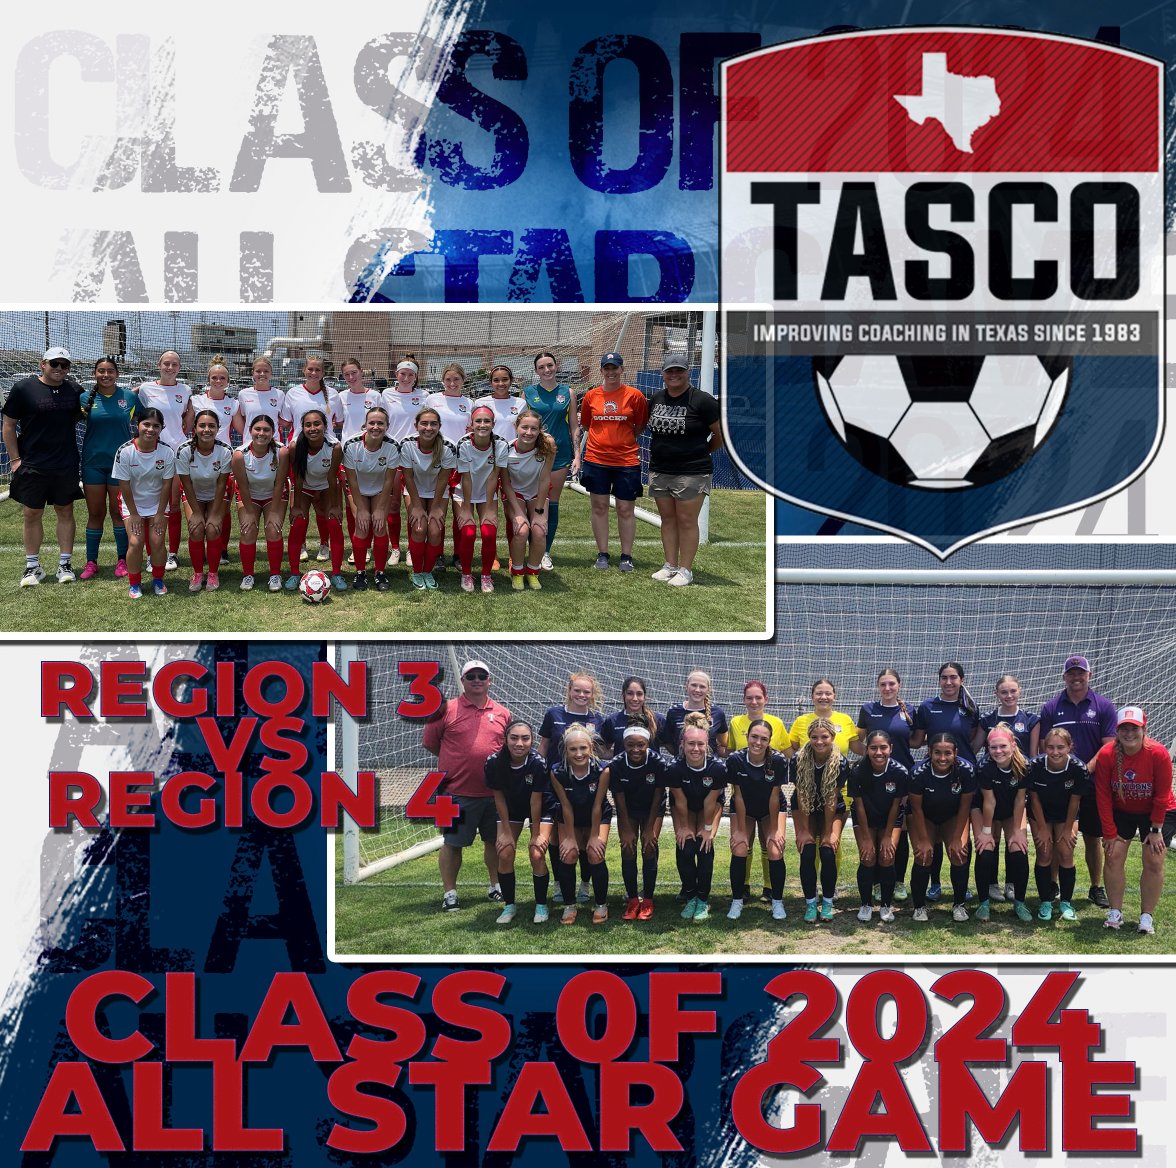 The weather was pretty great for our All Star game between Region 3 and Region 4 Girls teams yesterday! What a great way to end the 2023-2024 season for Texas Soccer! #TASCO #TASCOAllStar #TXHSSoccer #TXHSSoc